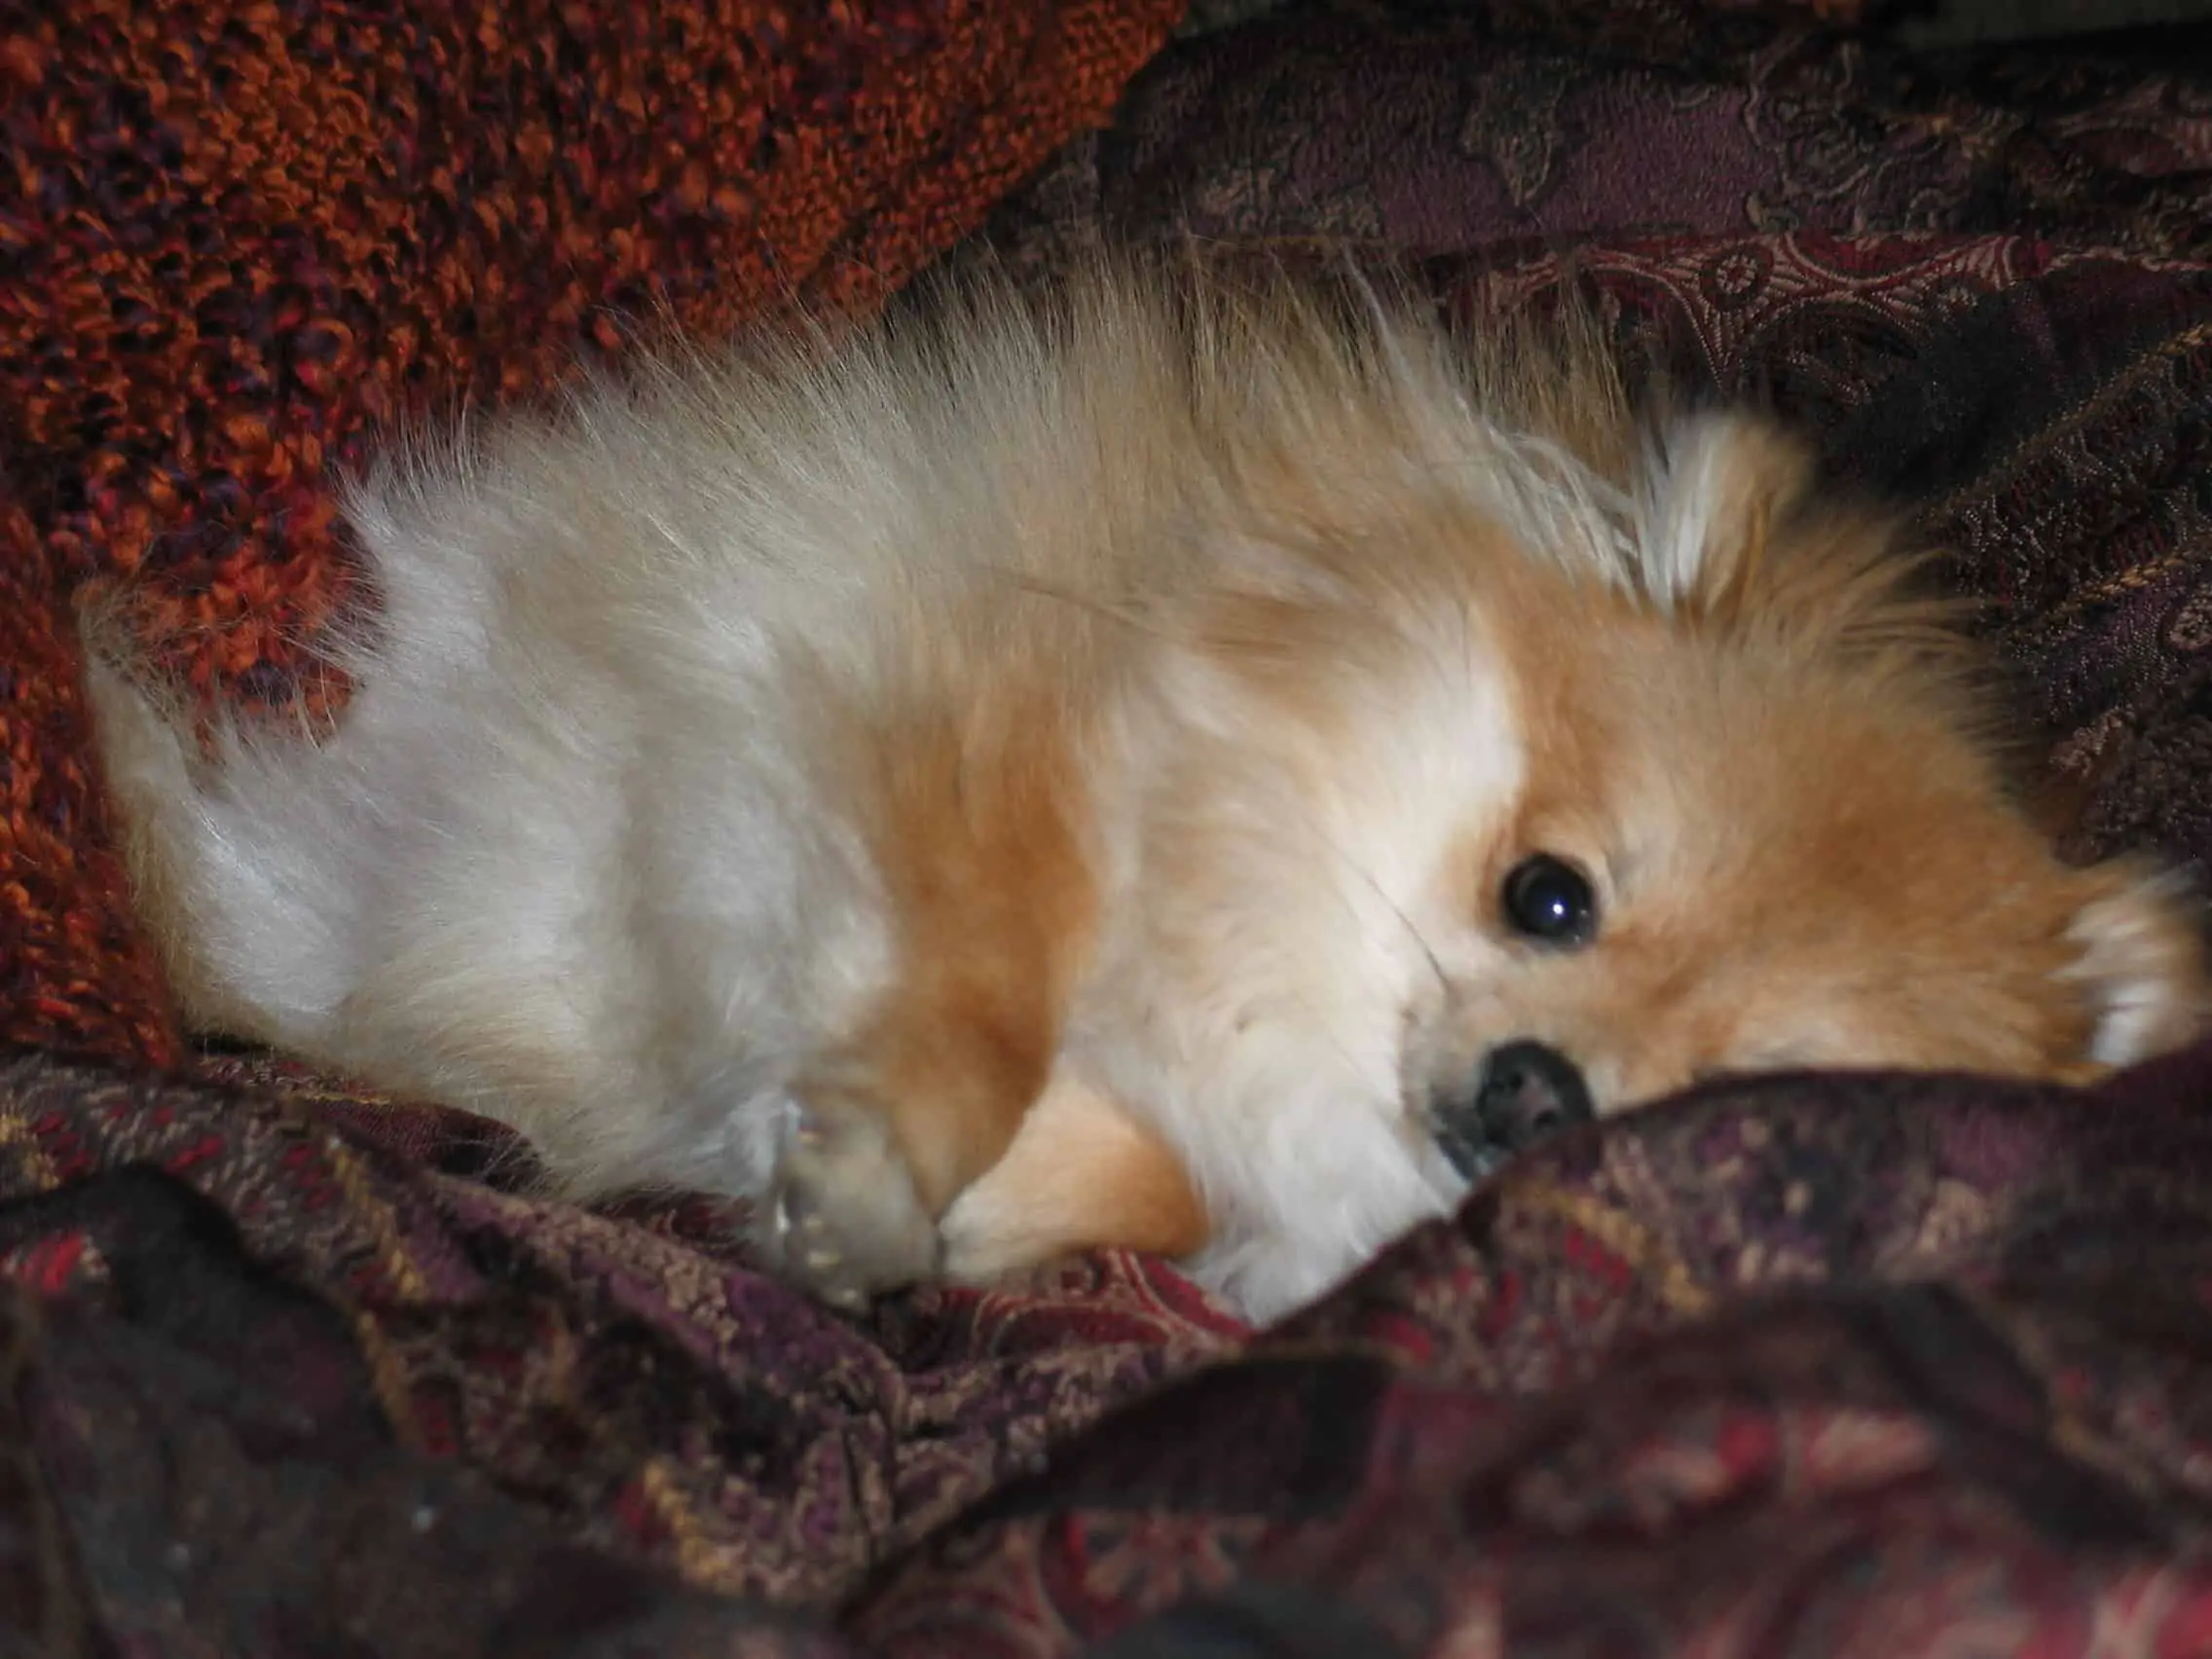 Annoyed Teacup Pomeranian trying to sleep giving the stink eye to the camera person (me).